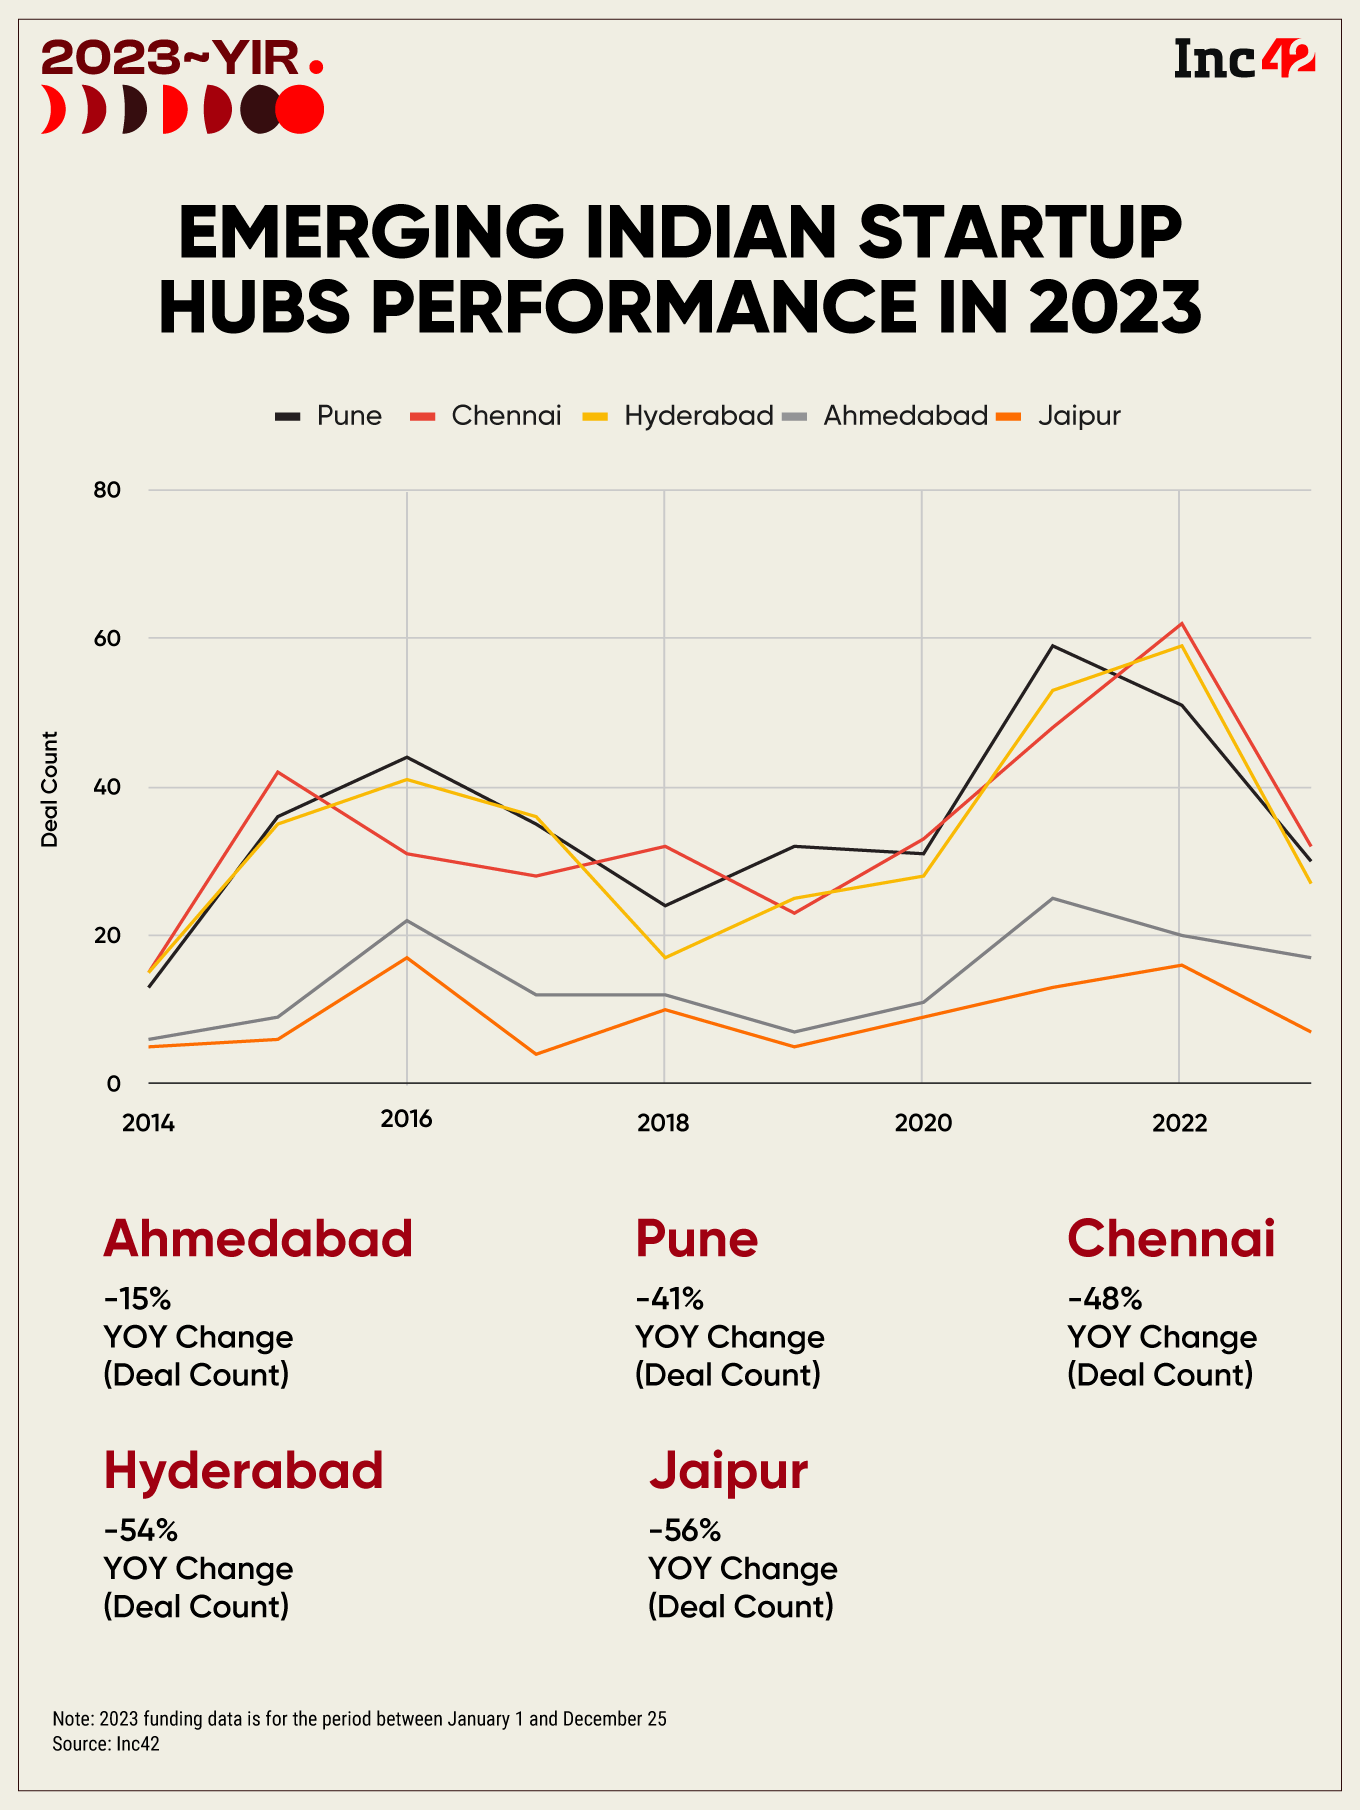 Amid Capital Crunch, How Did Emerging Indian Startup Hubs Fare In 2023?